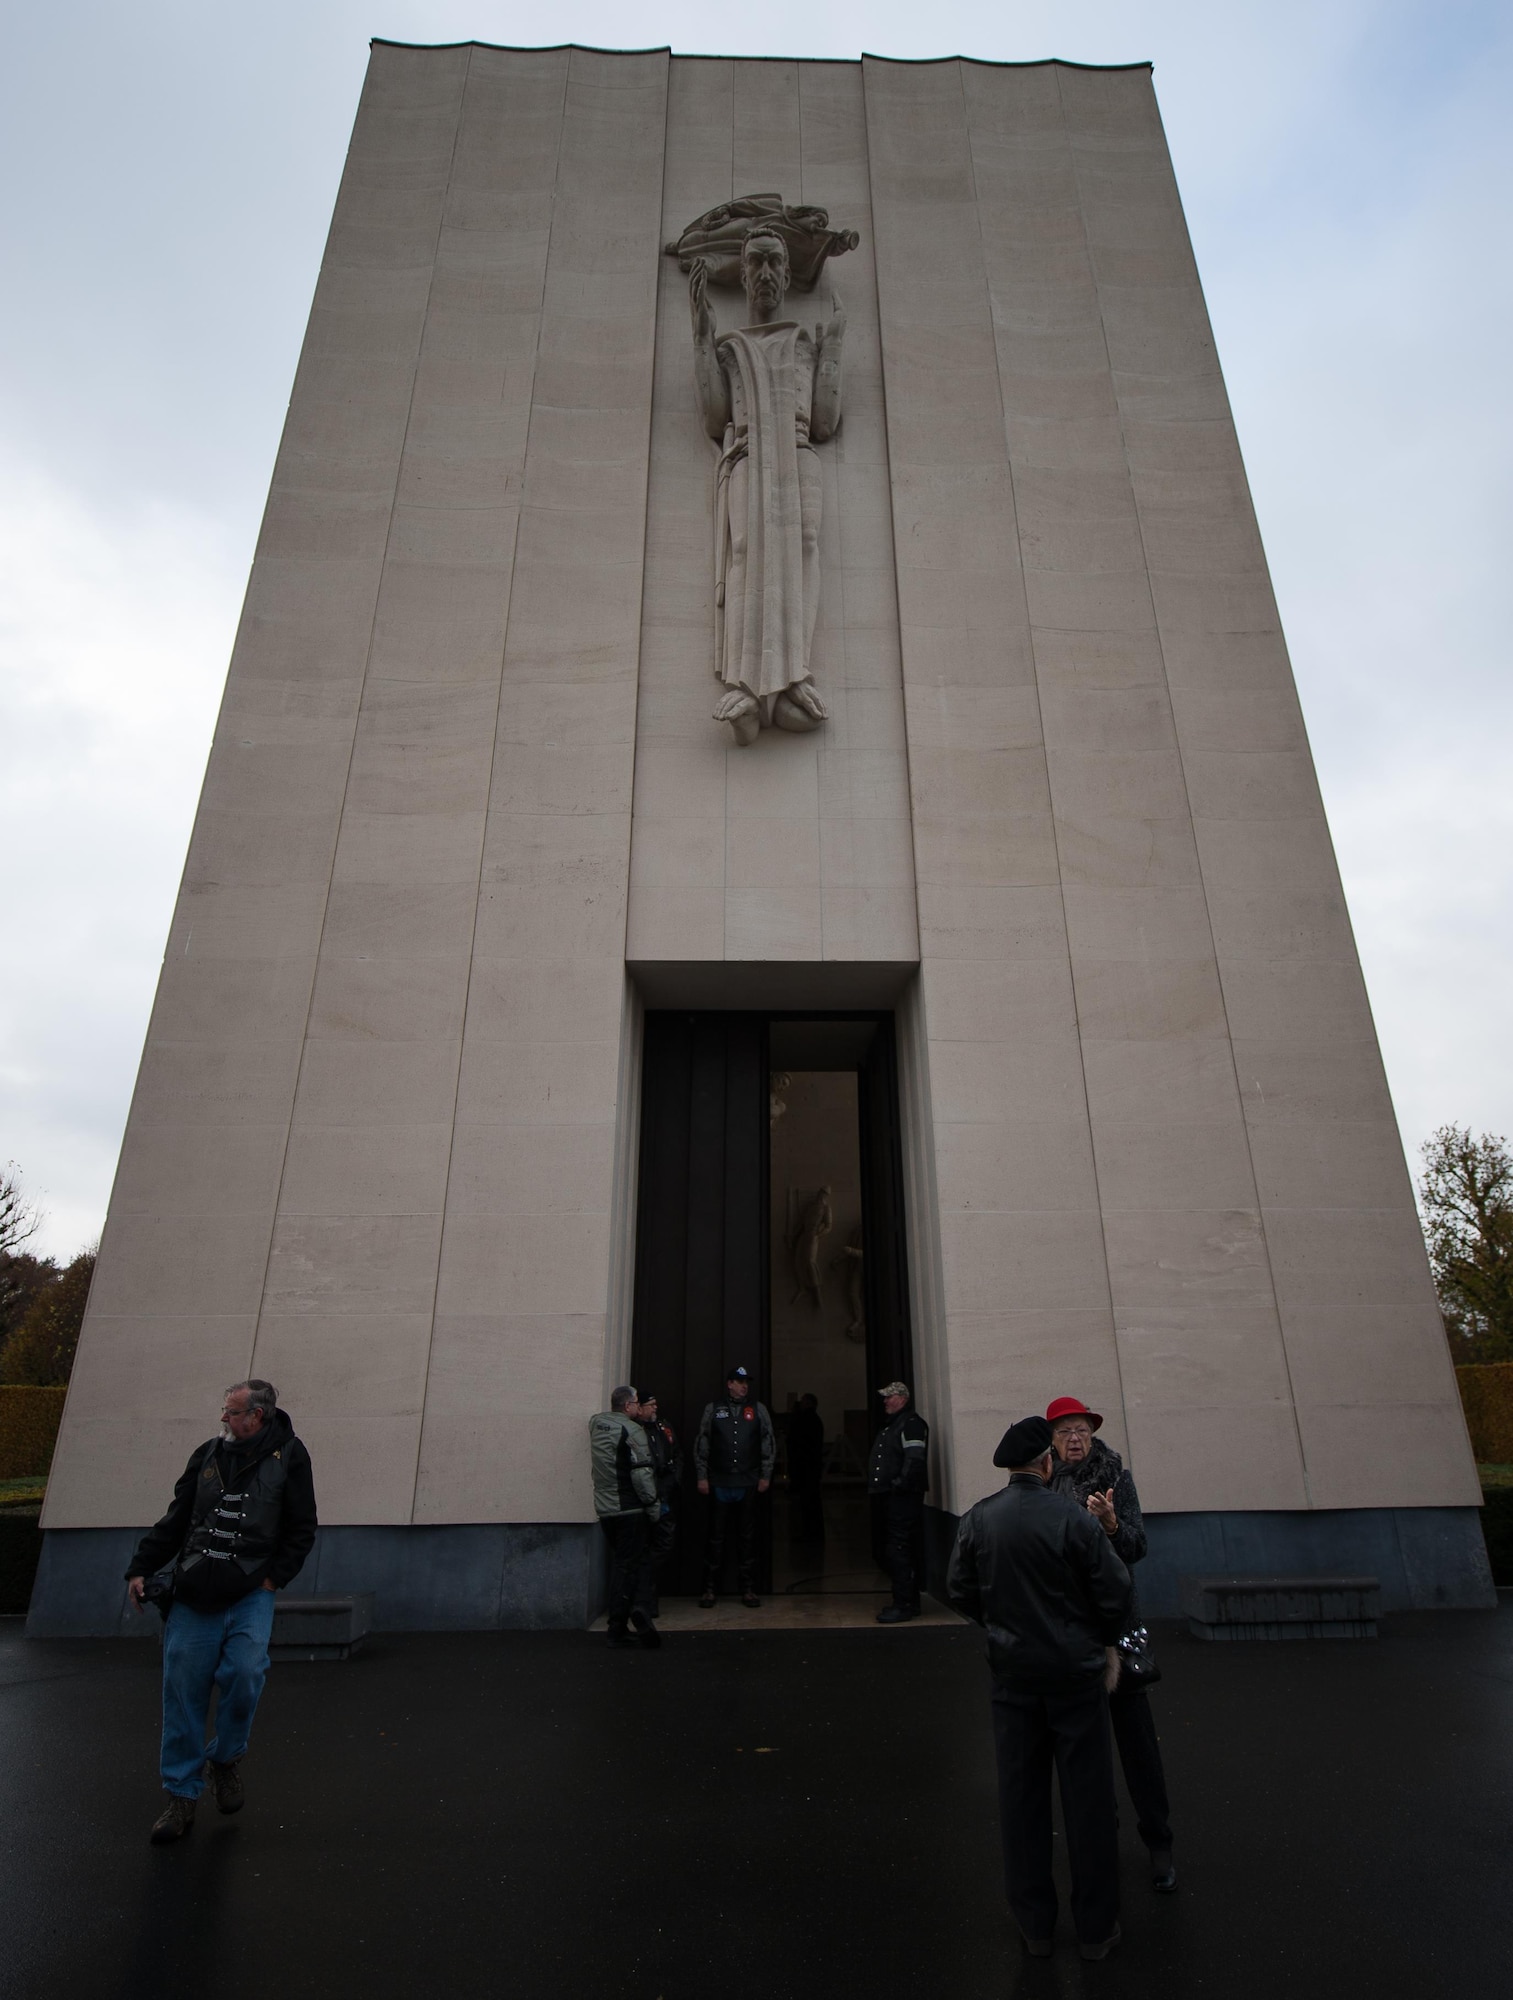 People visit a chapel to pay respects to deceased war veterans at the Lorraine American Cemetery Nov. 11, 2016, at St. Avold, France. Veteran’s Day is observed annually on November 11 and commemorates military veterans who currently serve or have served the U.S. armed forces, including those who gave the ultimate sacrifice. According to the DoD and Veterans Administration, since World War I, approximately 624,000 U.S. servicemembers have been killed in action battling in wars and conflicts. The Lorraine American Cemetery contains the buried remains of over 10,000 of them. It is the largest burial site of U.S. servicemembers in Europe. (U.S. Air Force photo by Airman 1st Class Lane T. Plummer)